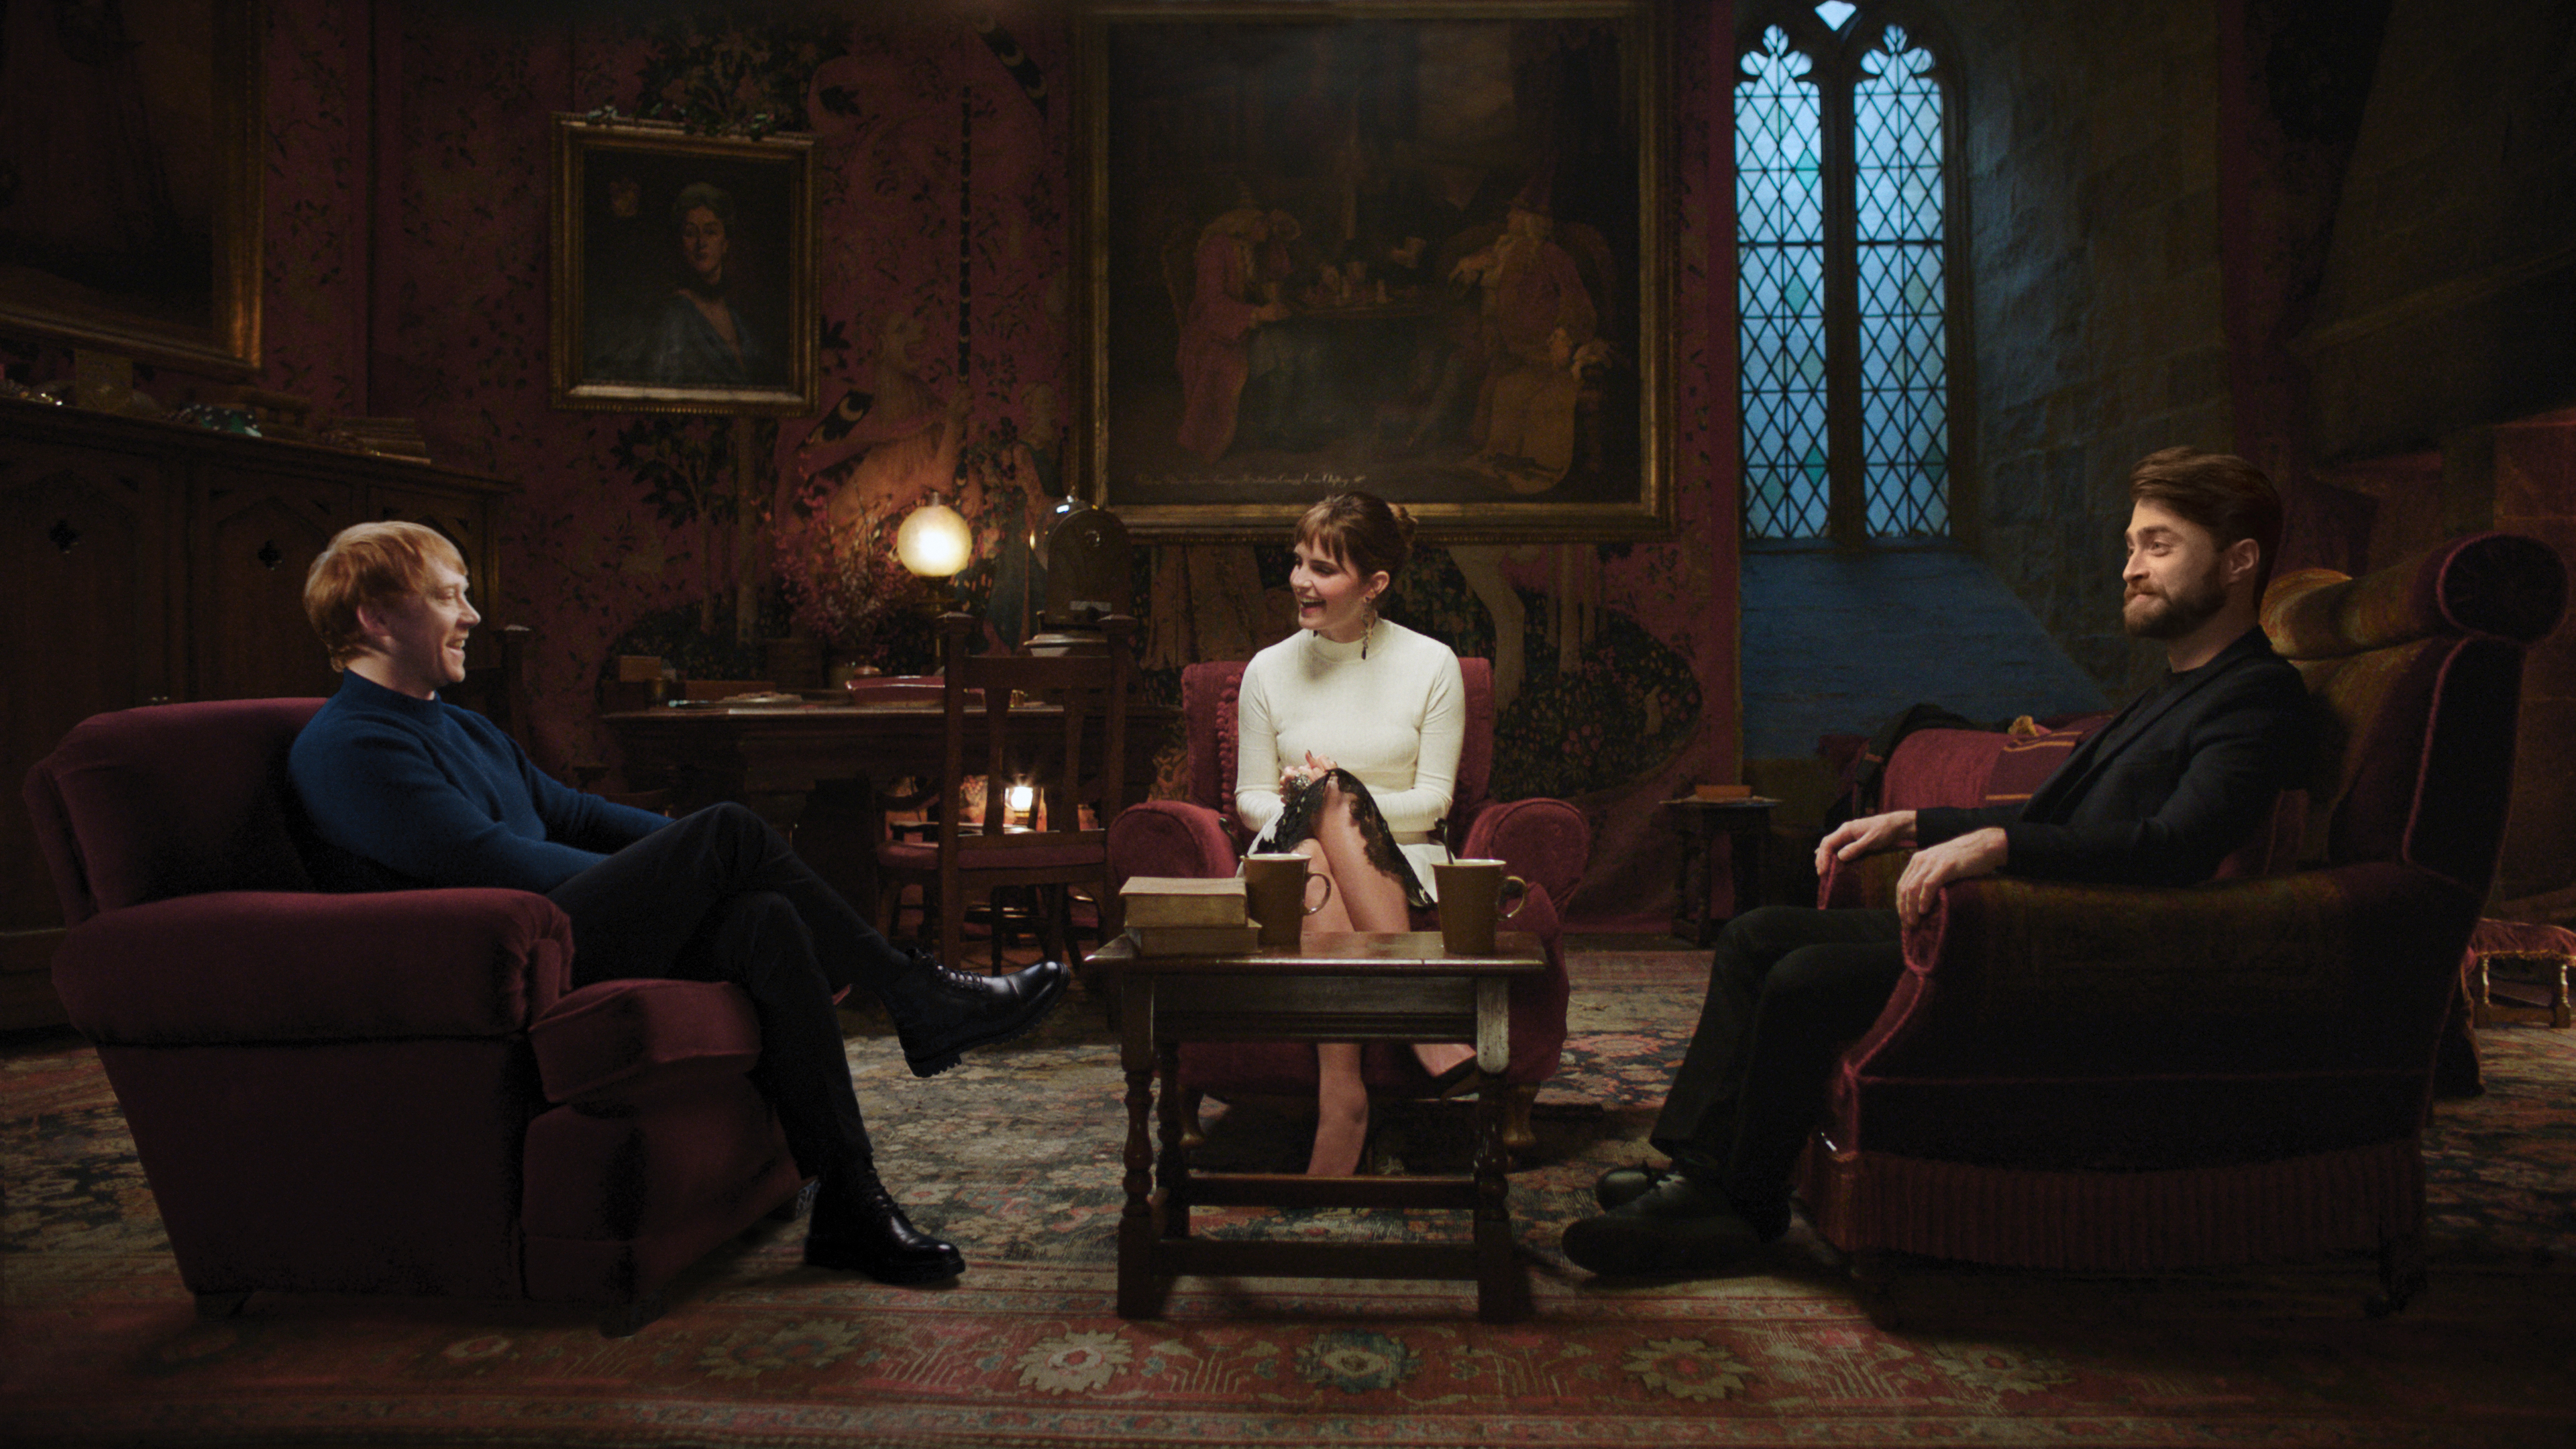 rupert grint, emma watson, and daniel radcliffe all sitting in the gryffindor common room 